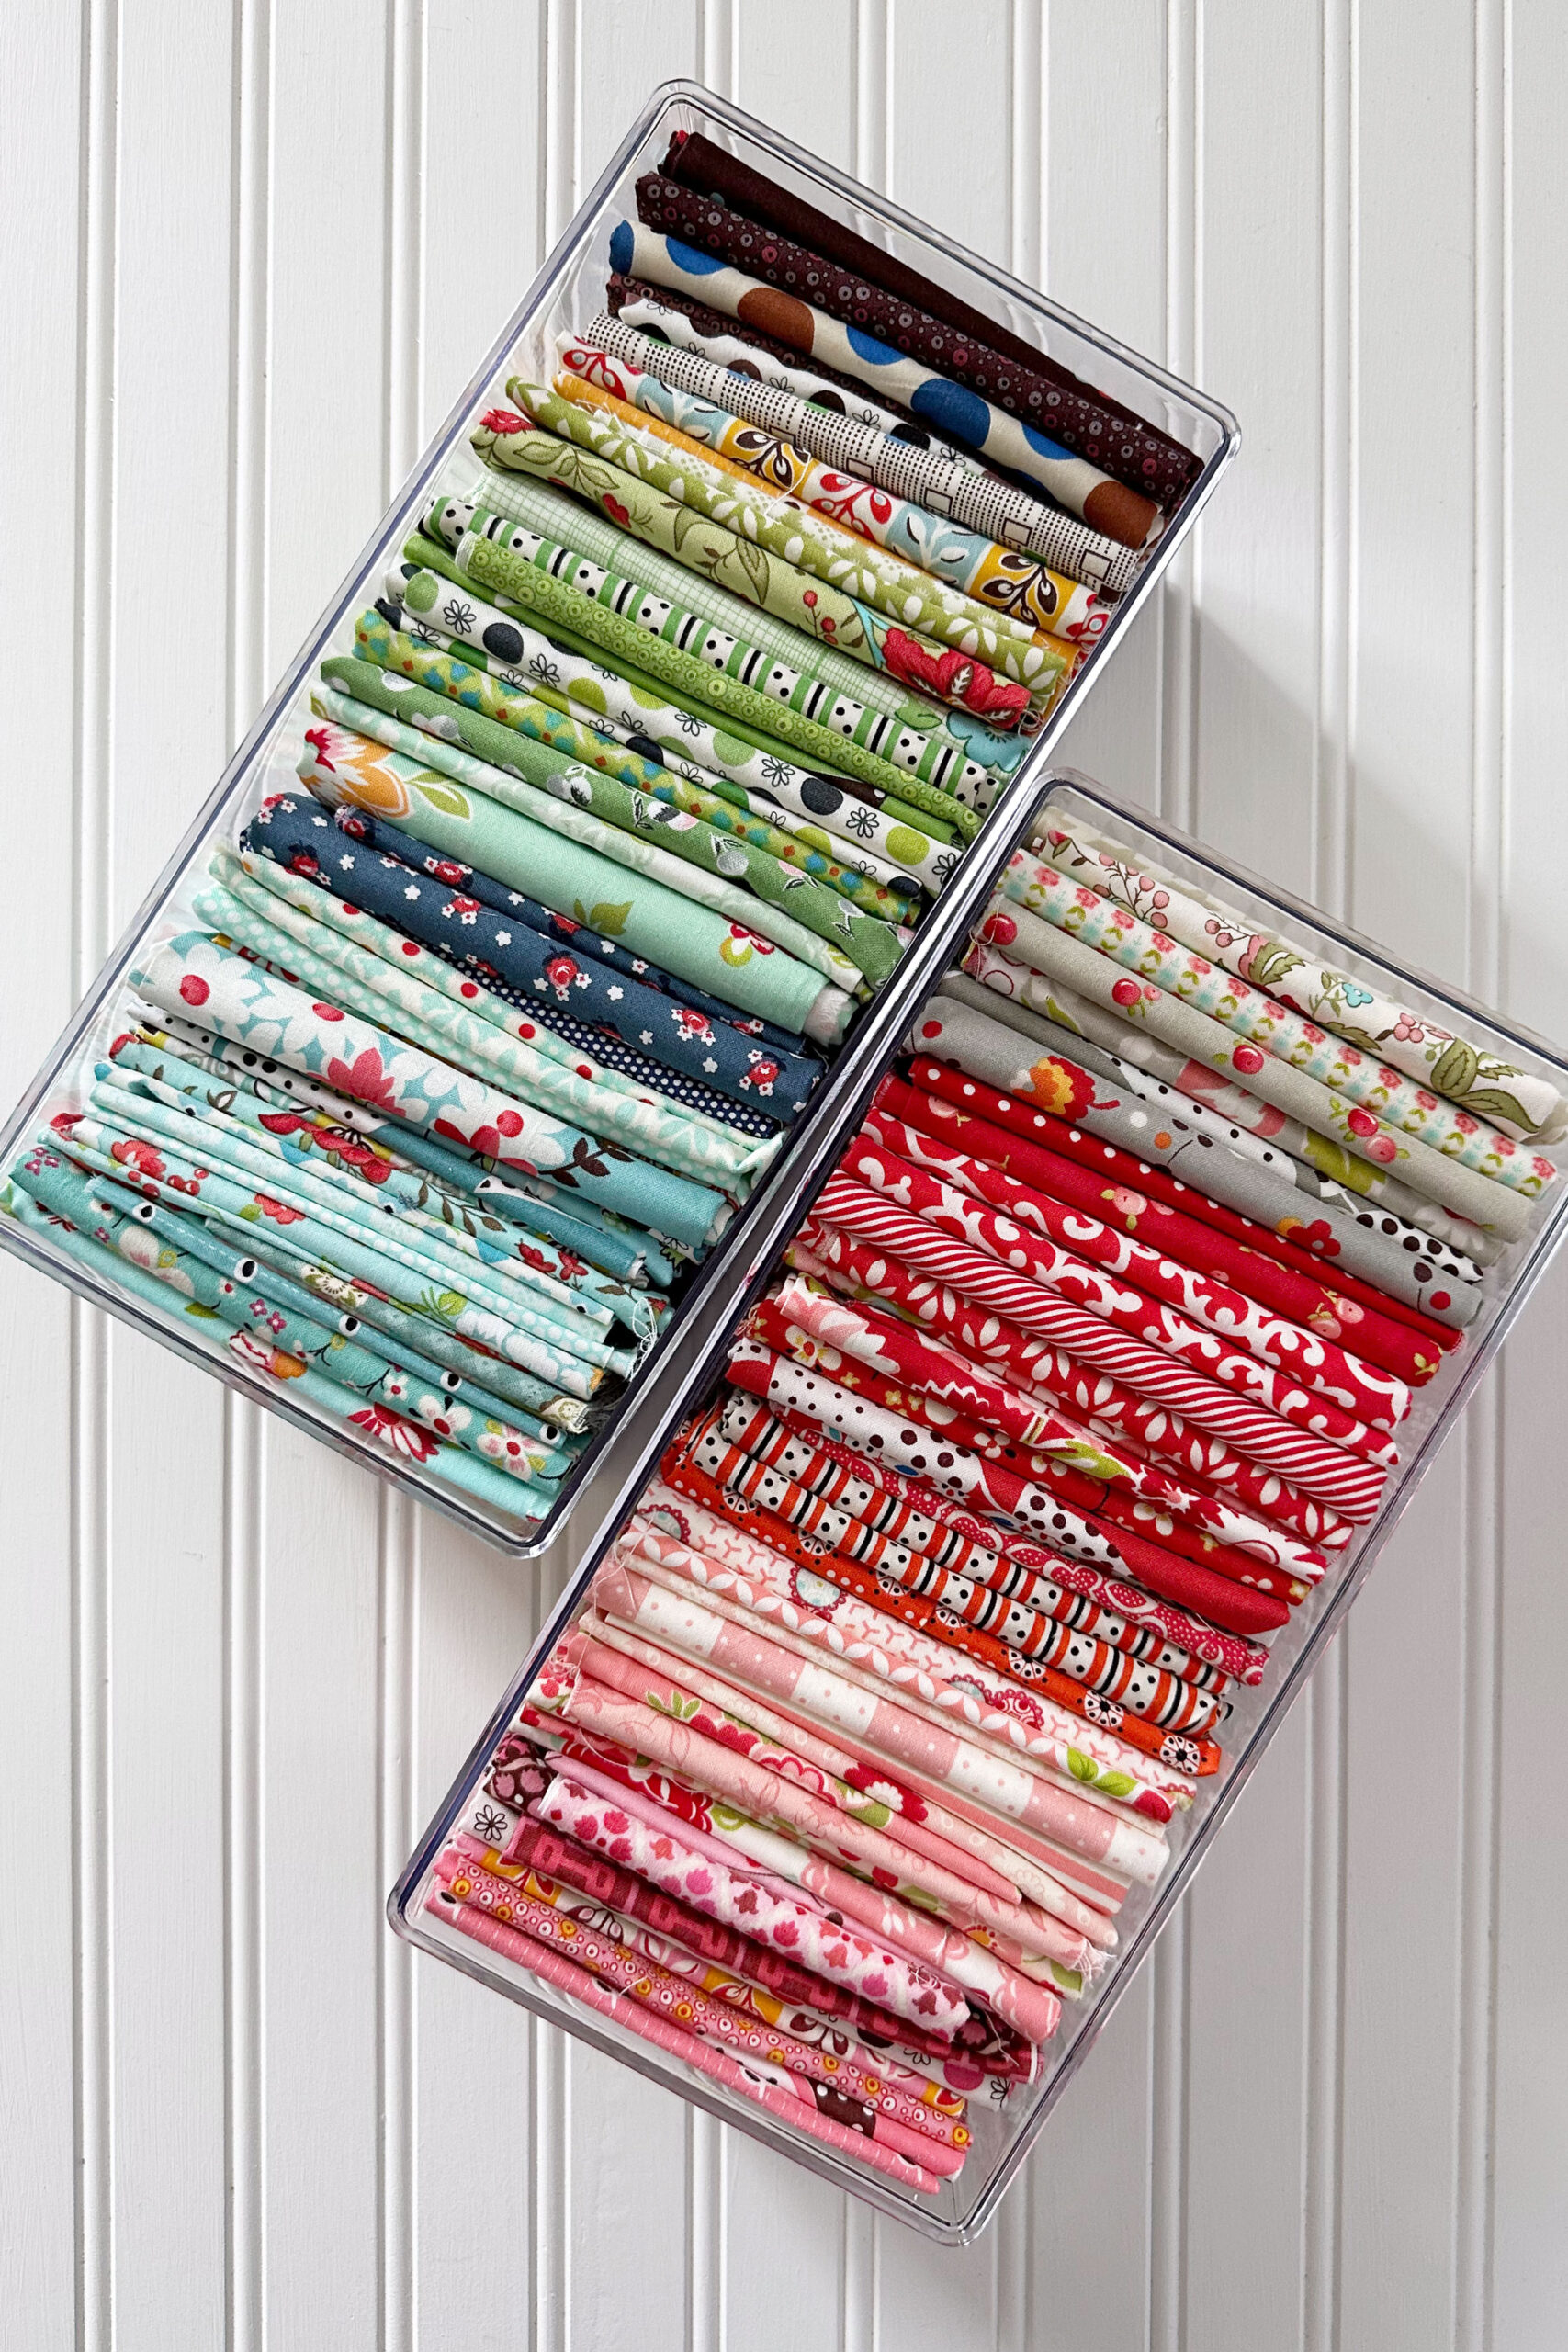 Pretty Fabric Storage Containers Organization - How-to-Guides